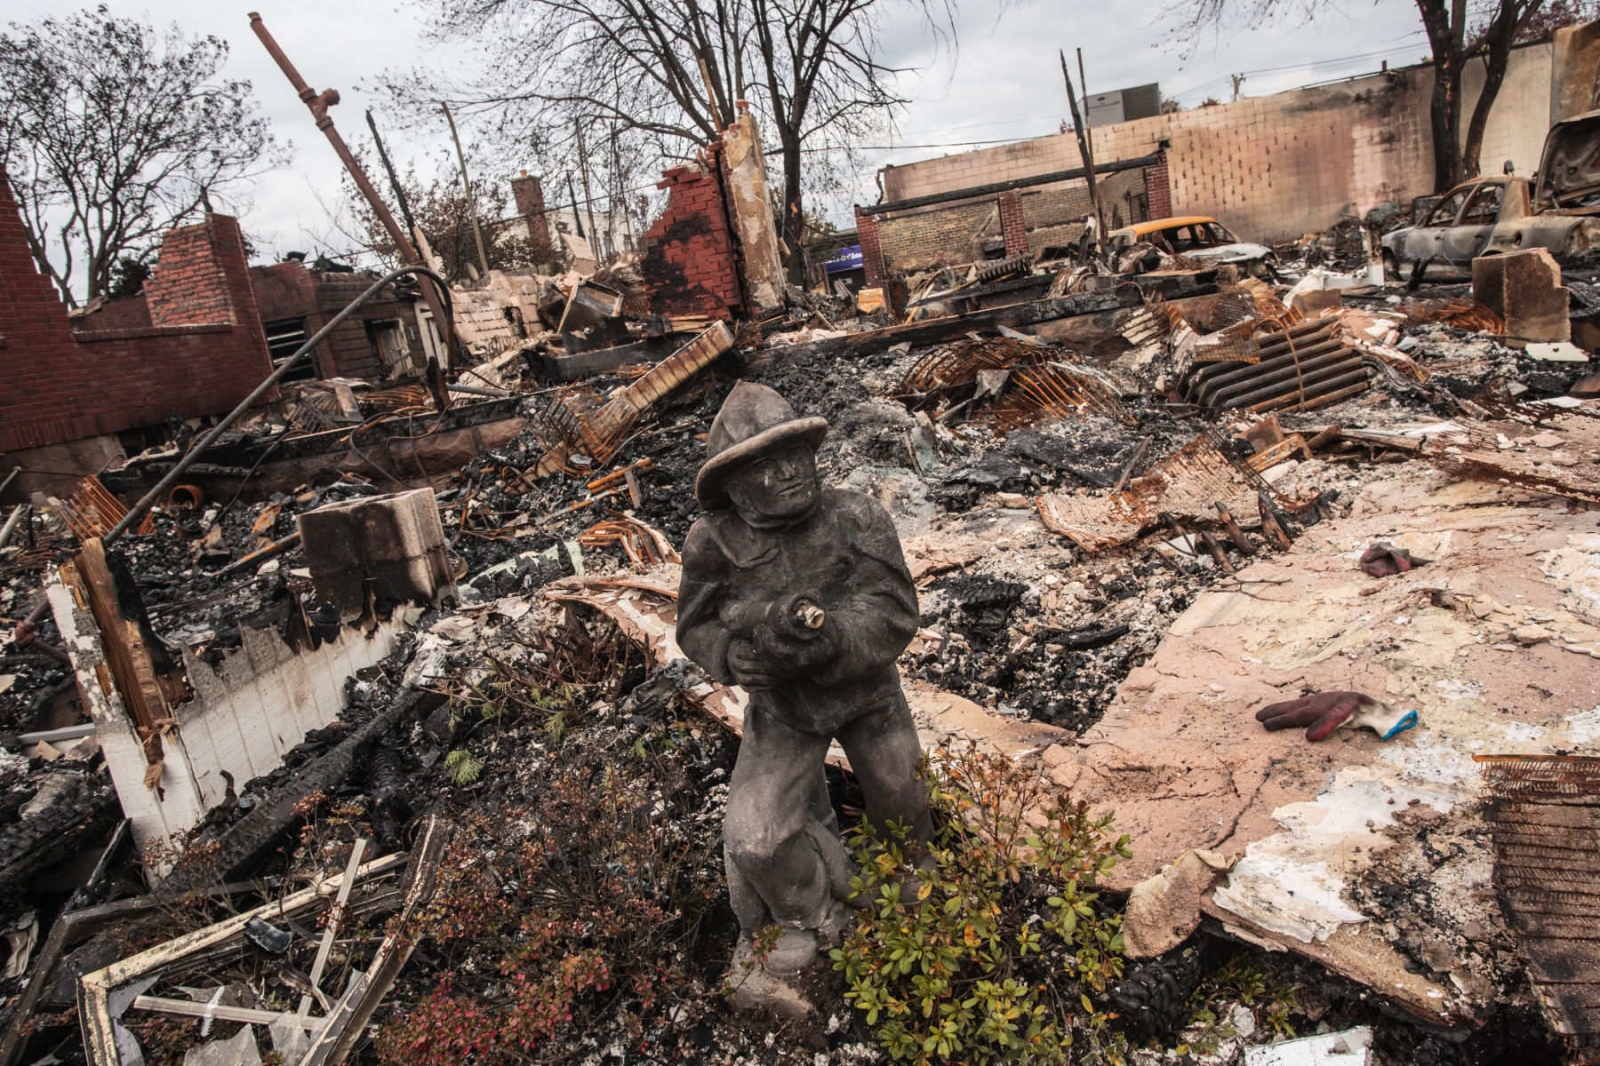 The Rockaways After Hurricane Sandy - A fireman's statue in front of one of the destroyed homes...